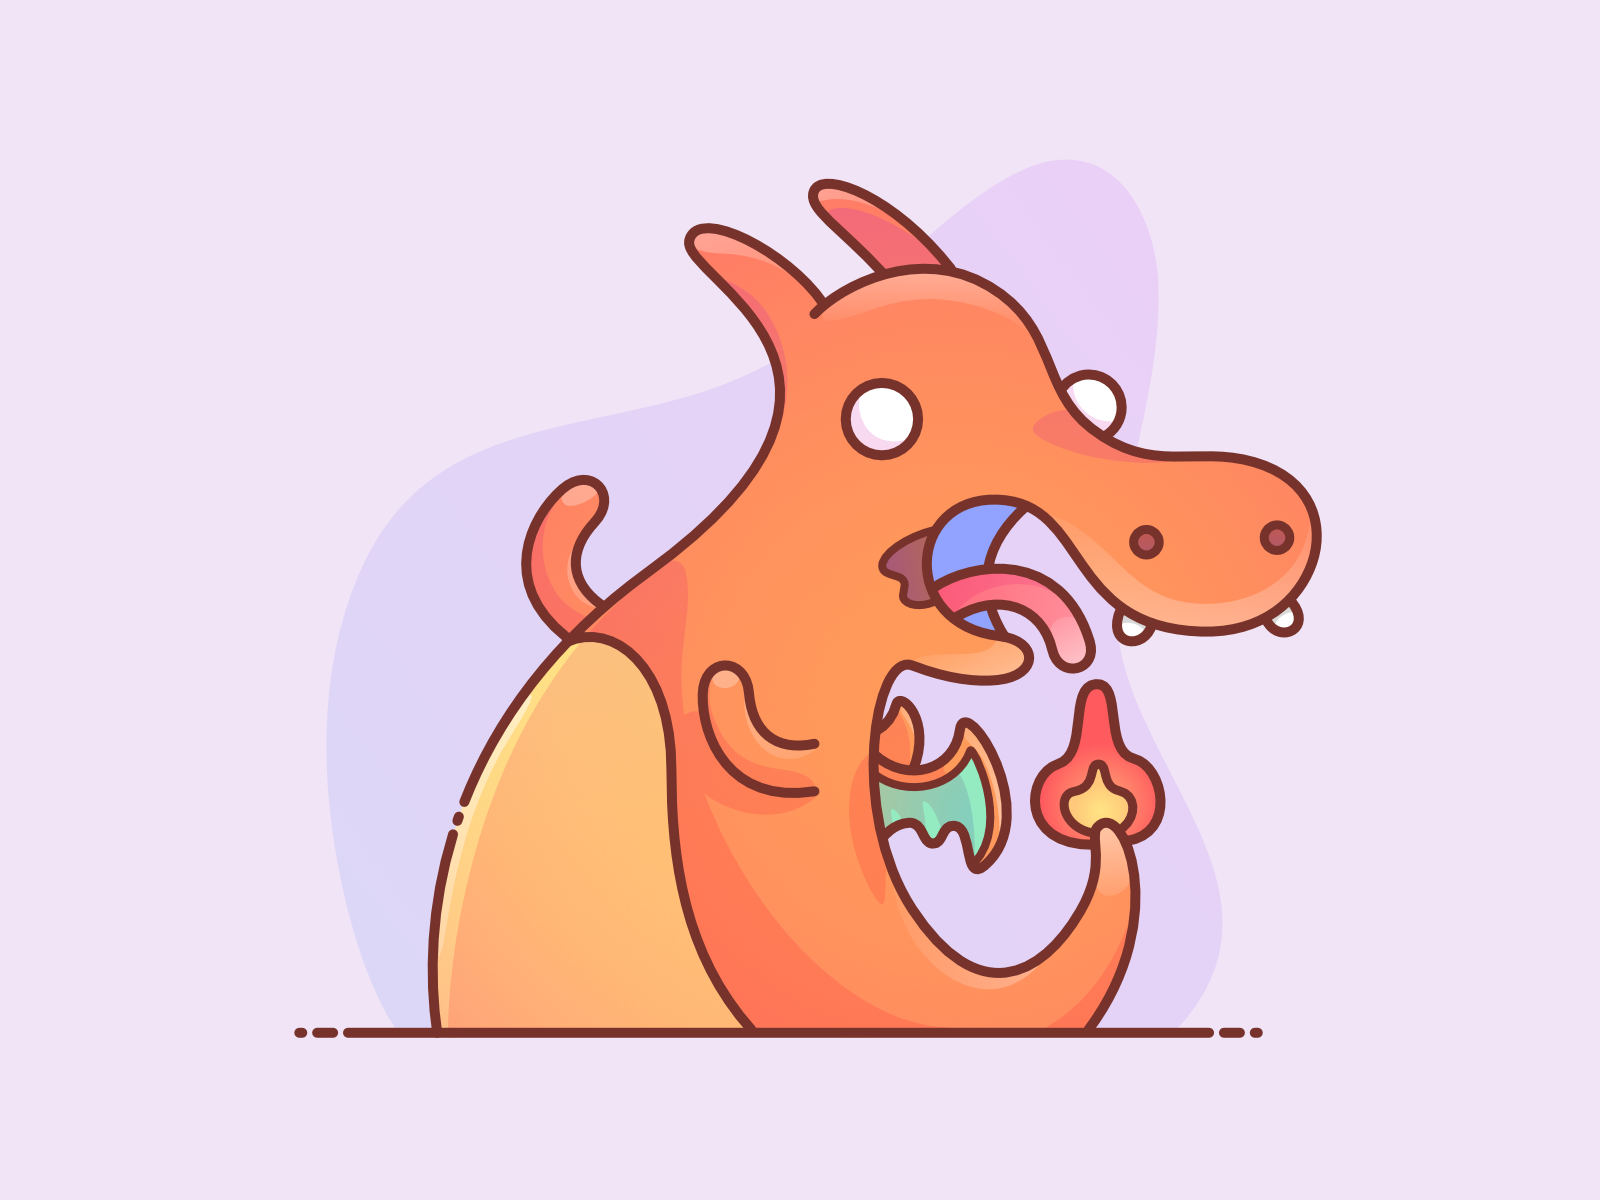 Reckless Charizard by Maurizio Carlini on Dribbble